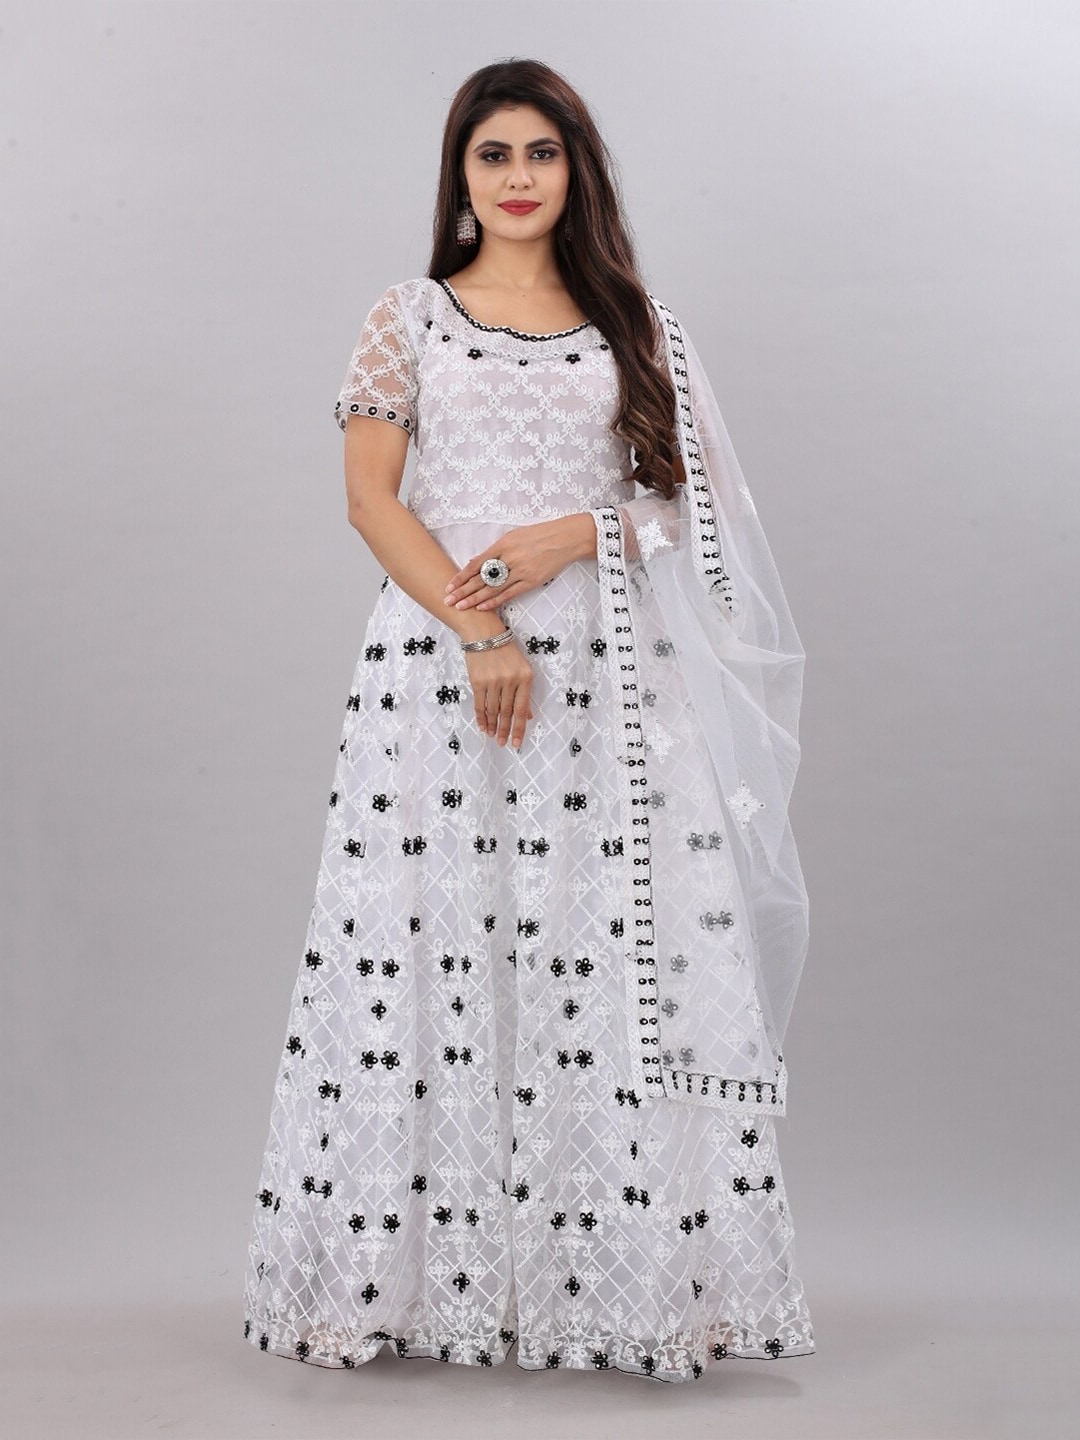 APNISHA White Floral Embroidered Net Semi-Stitched Maxi Dress Price in India